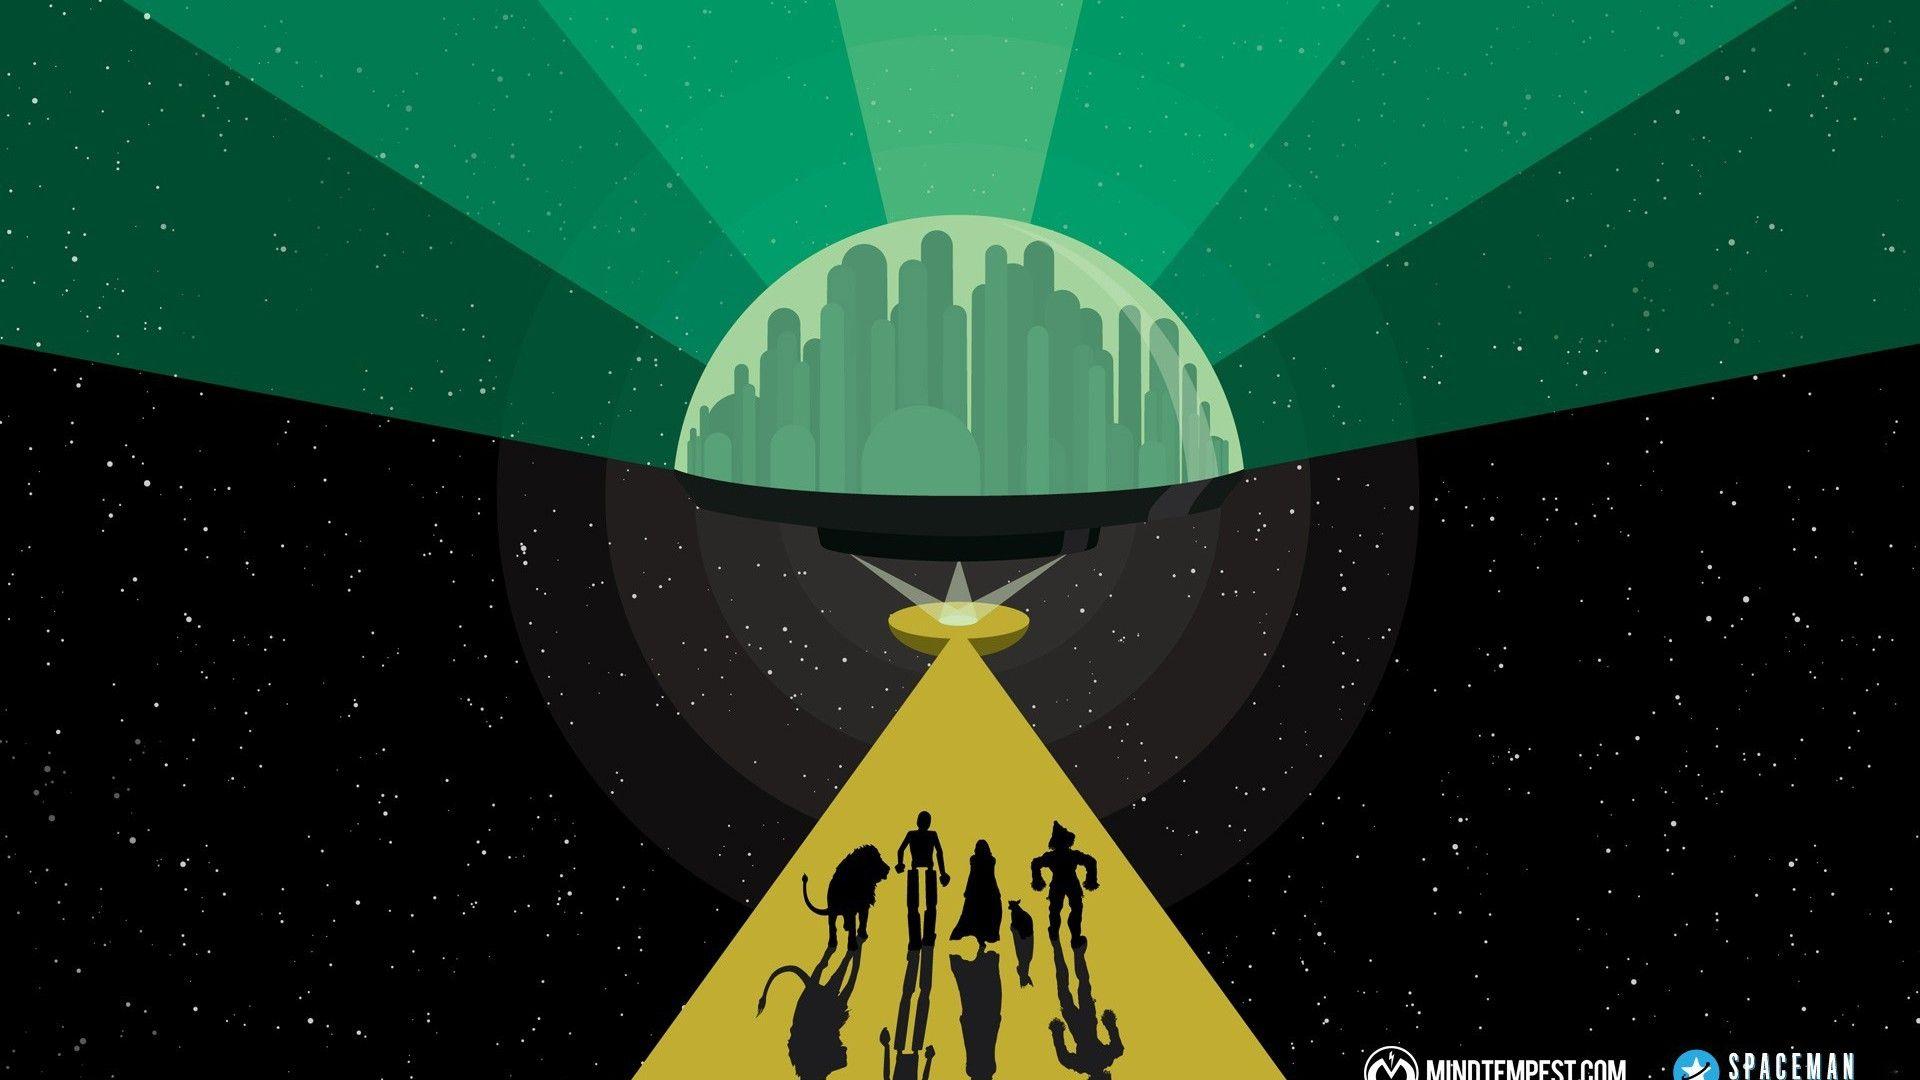 Silhouettes paths wizard of oz artwork cities wallpaper